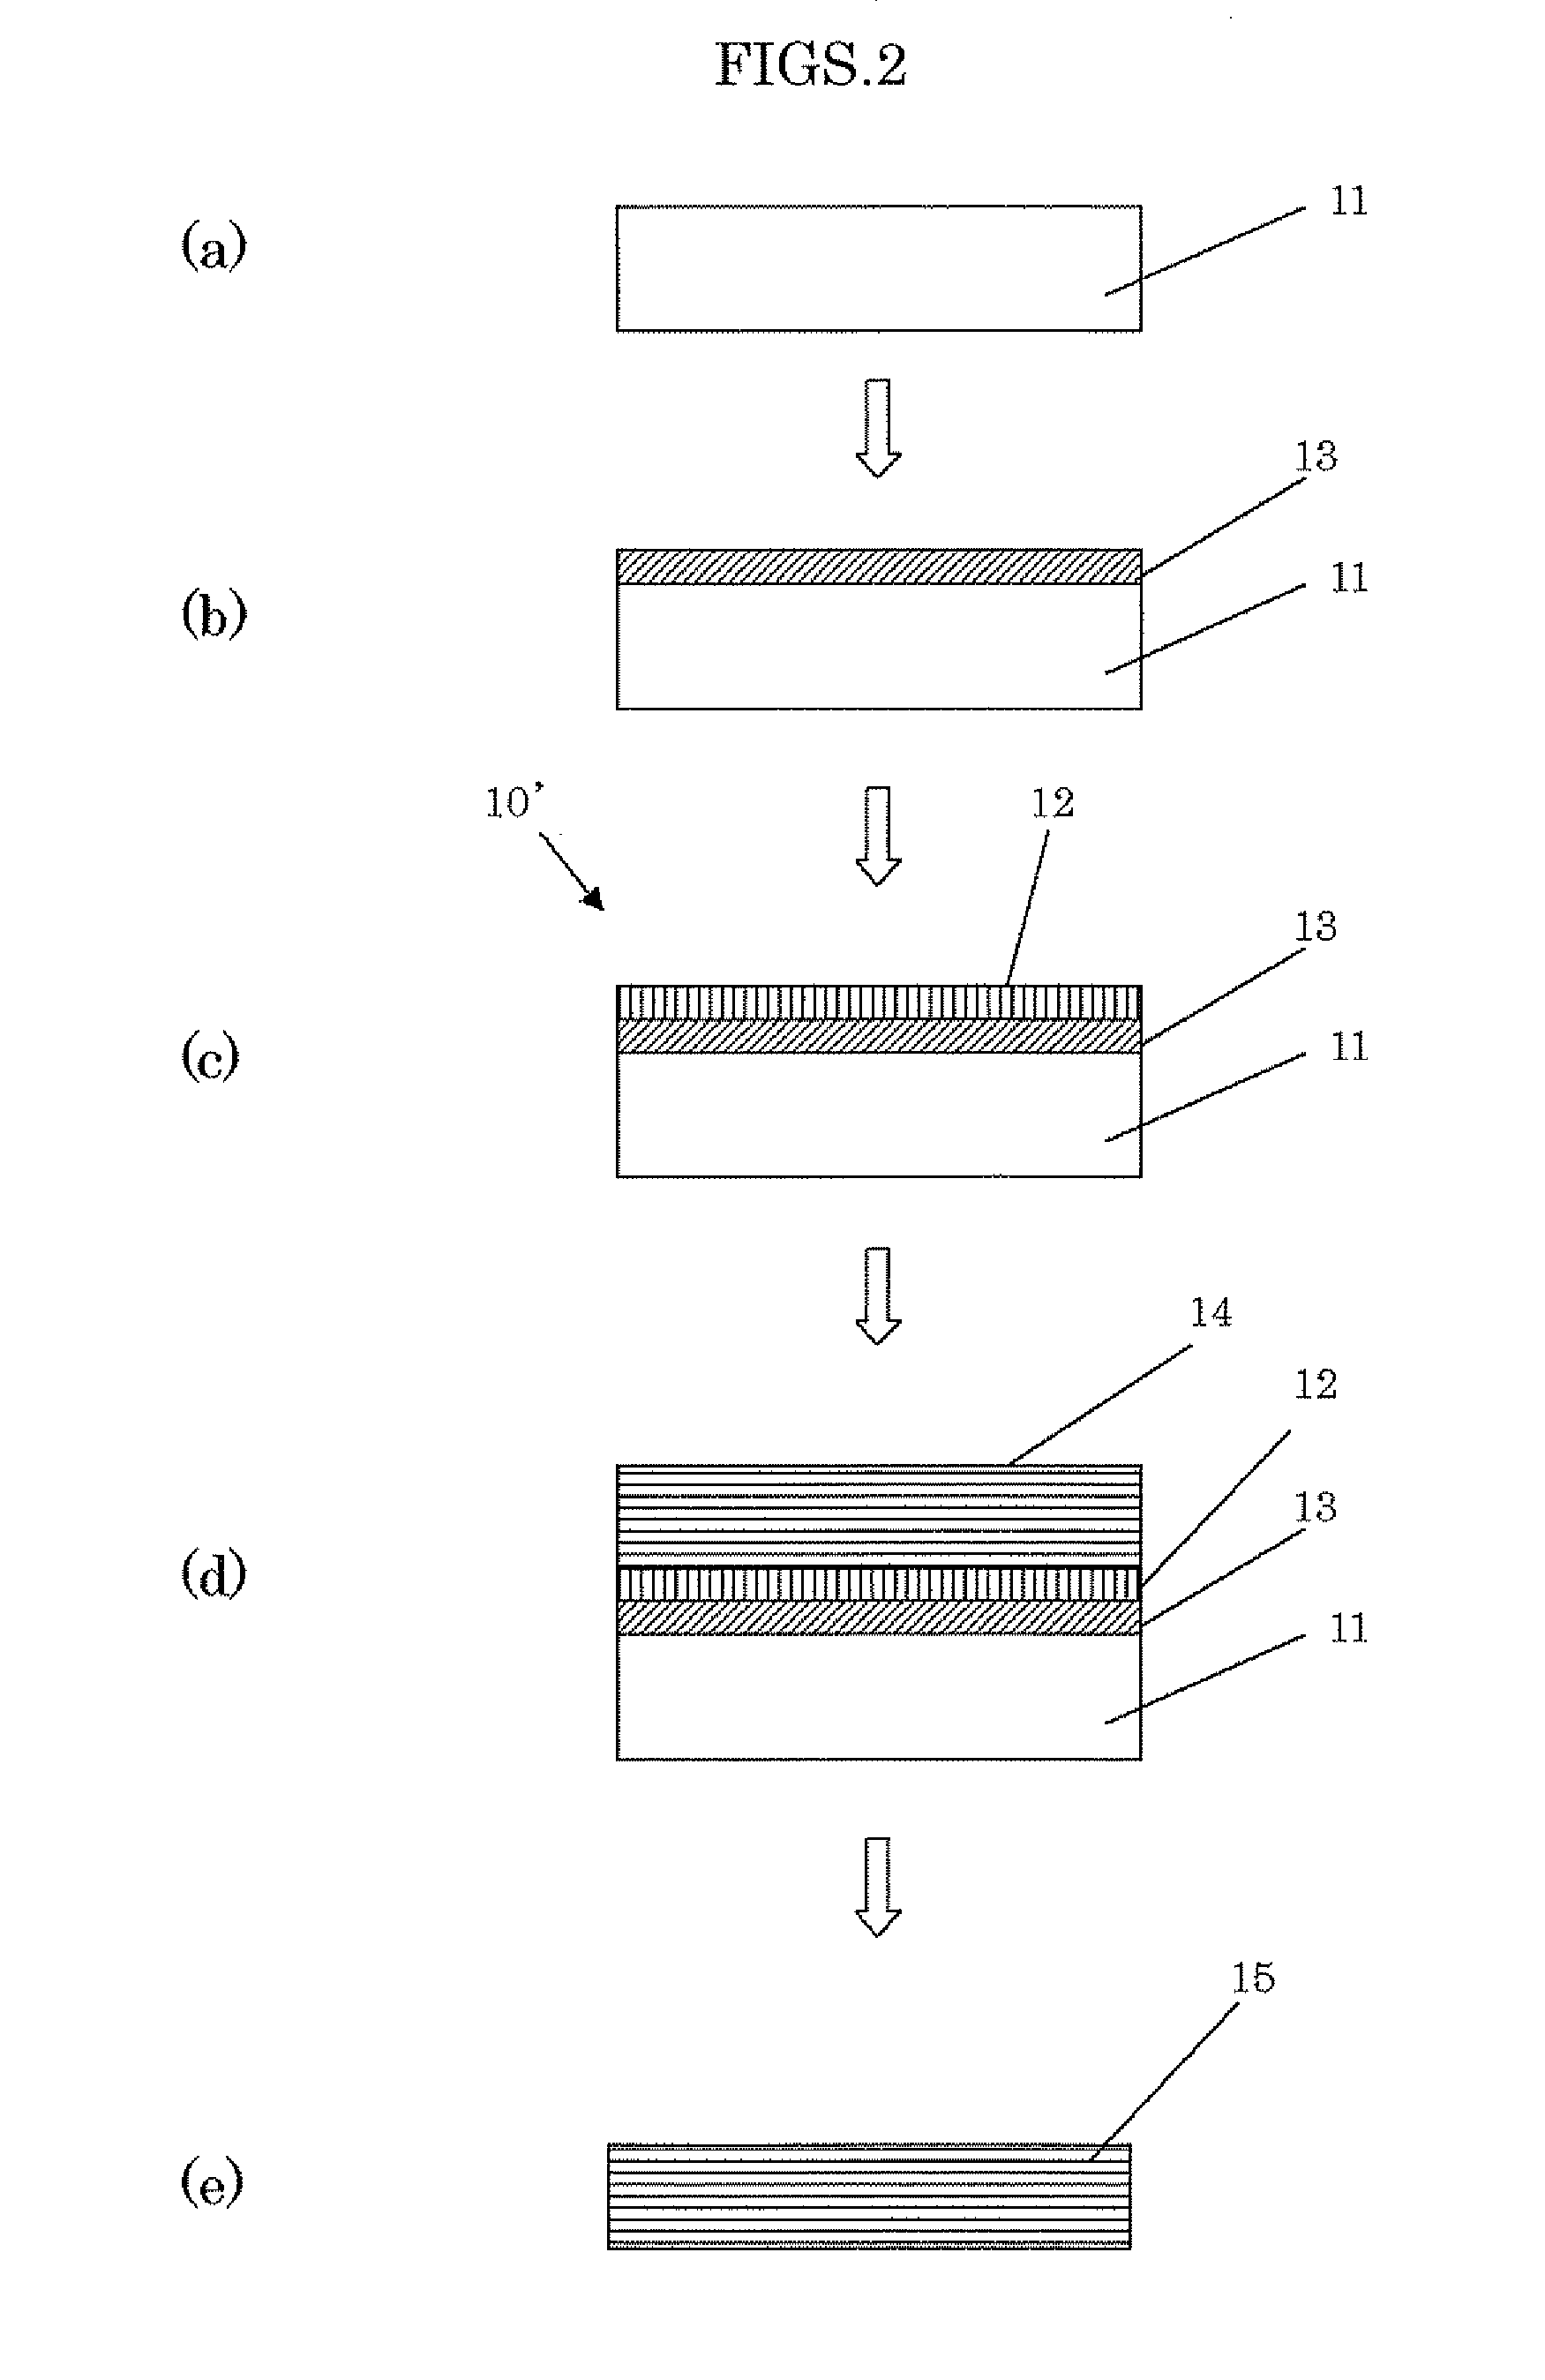 Base material for growing single crystal diamond and method for producing single crystal diamond substrate